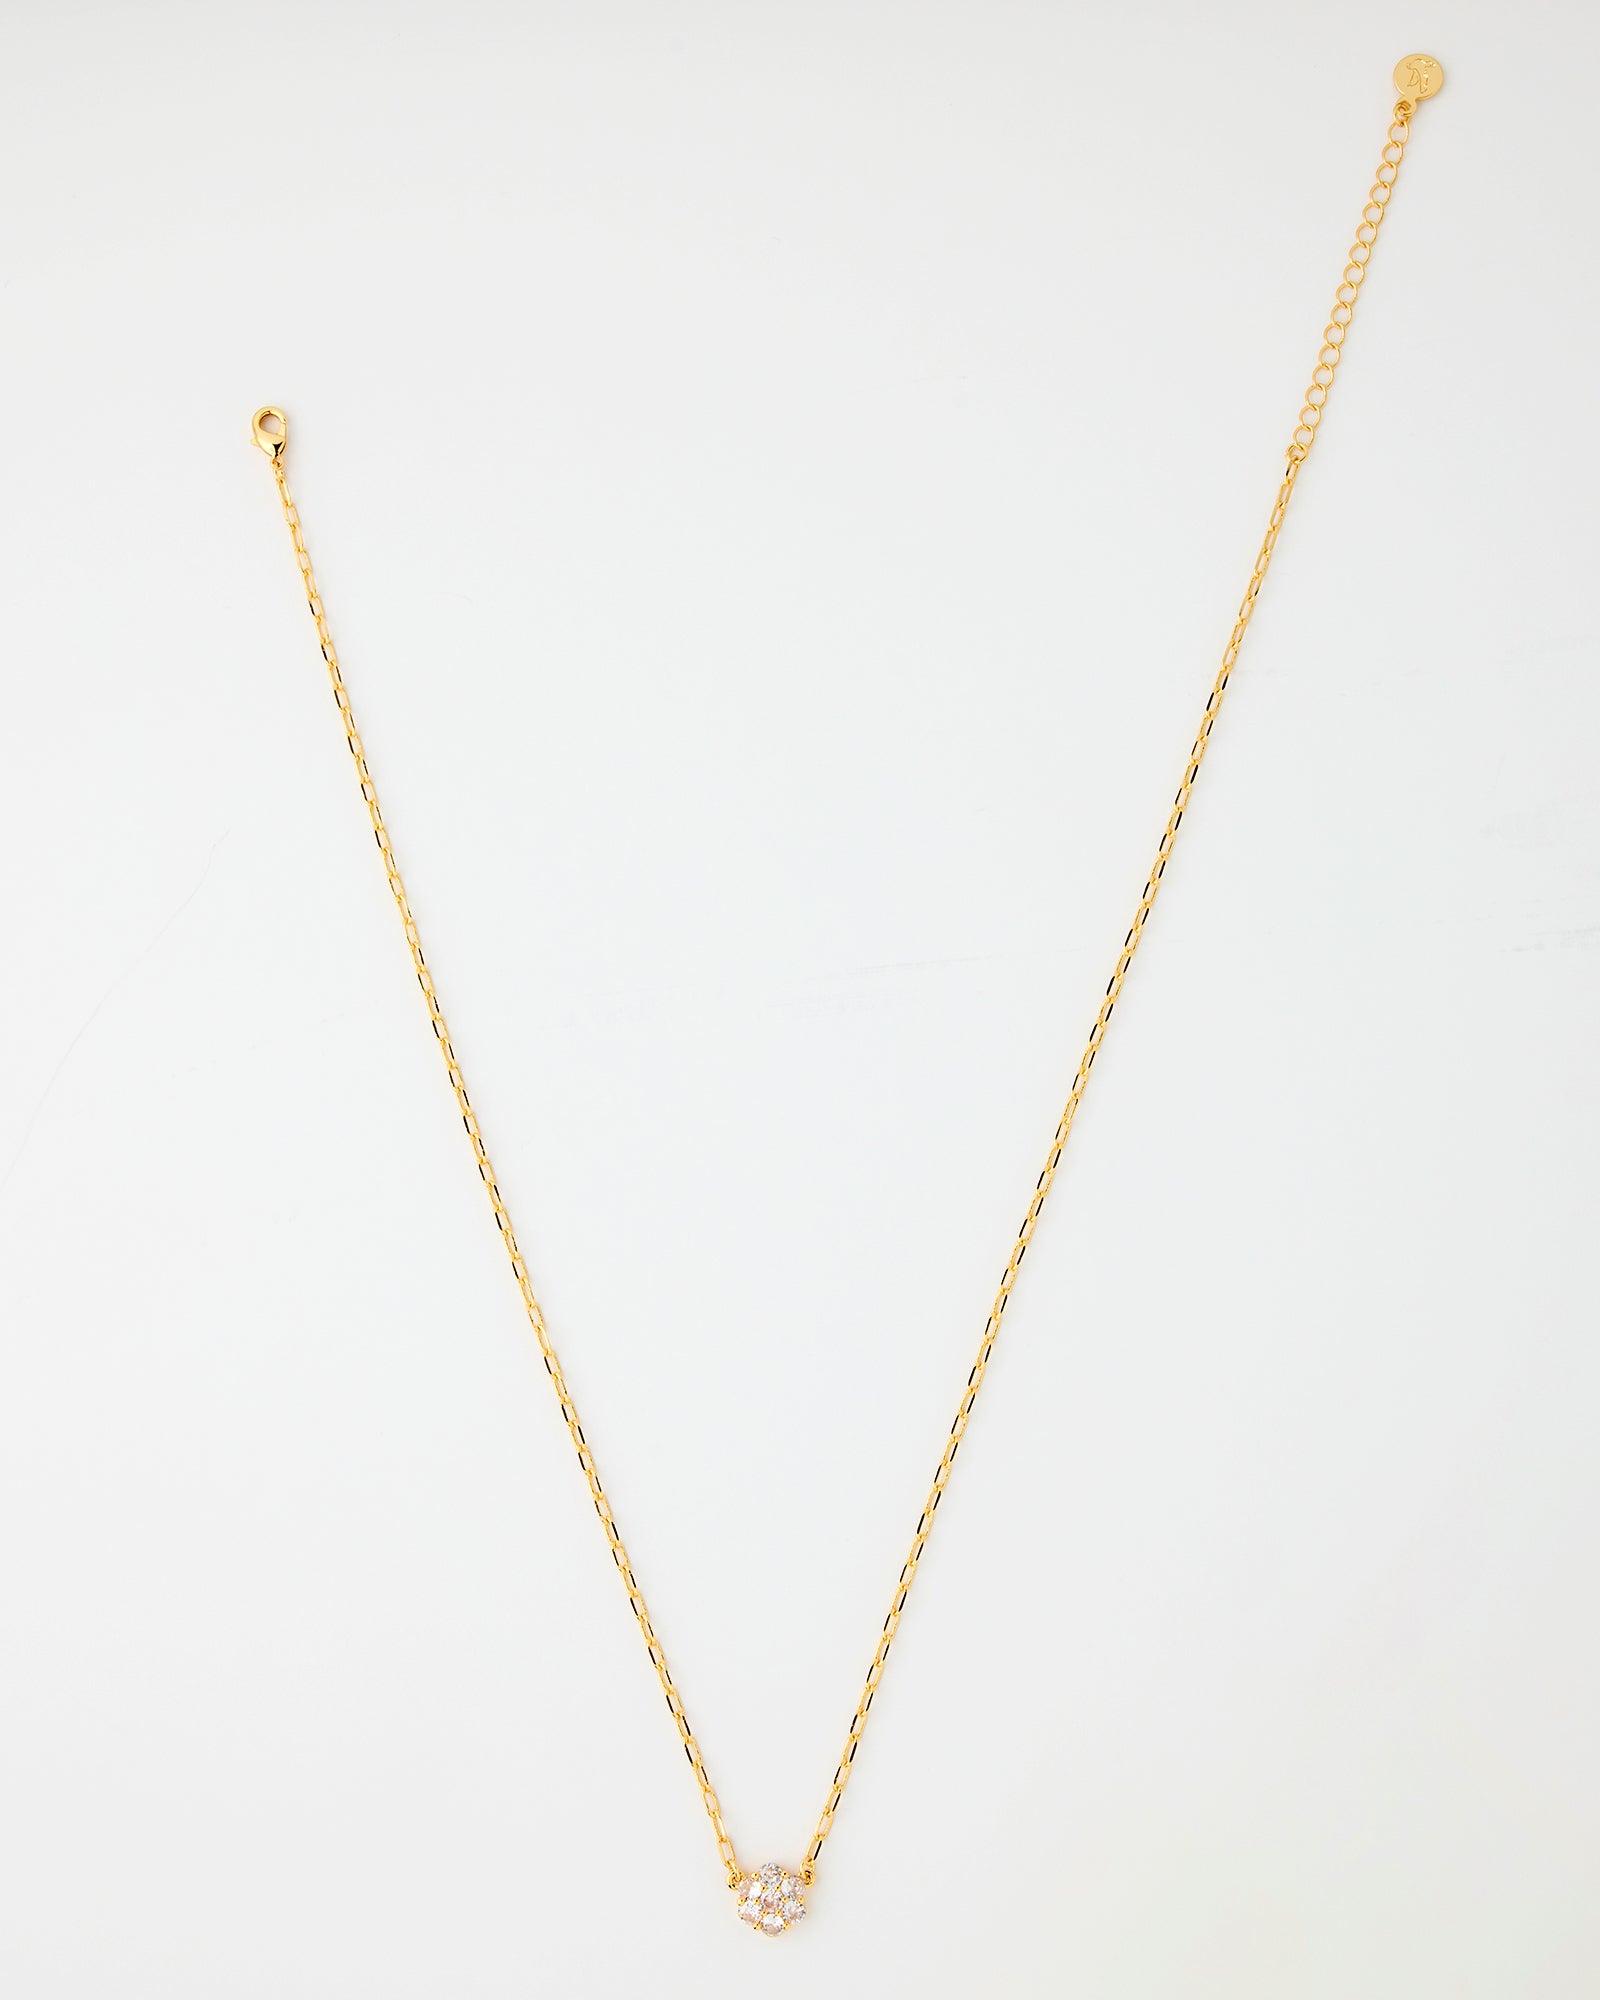 Gold chain necklace with gems in flower pattern